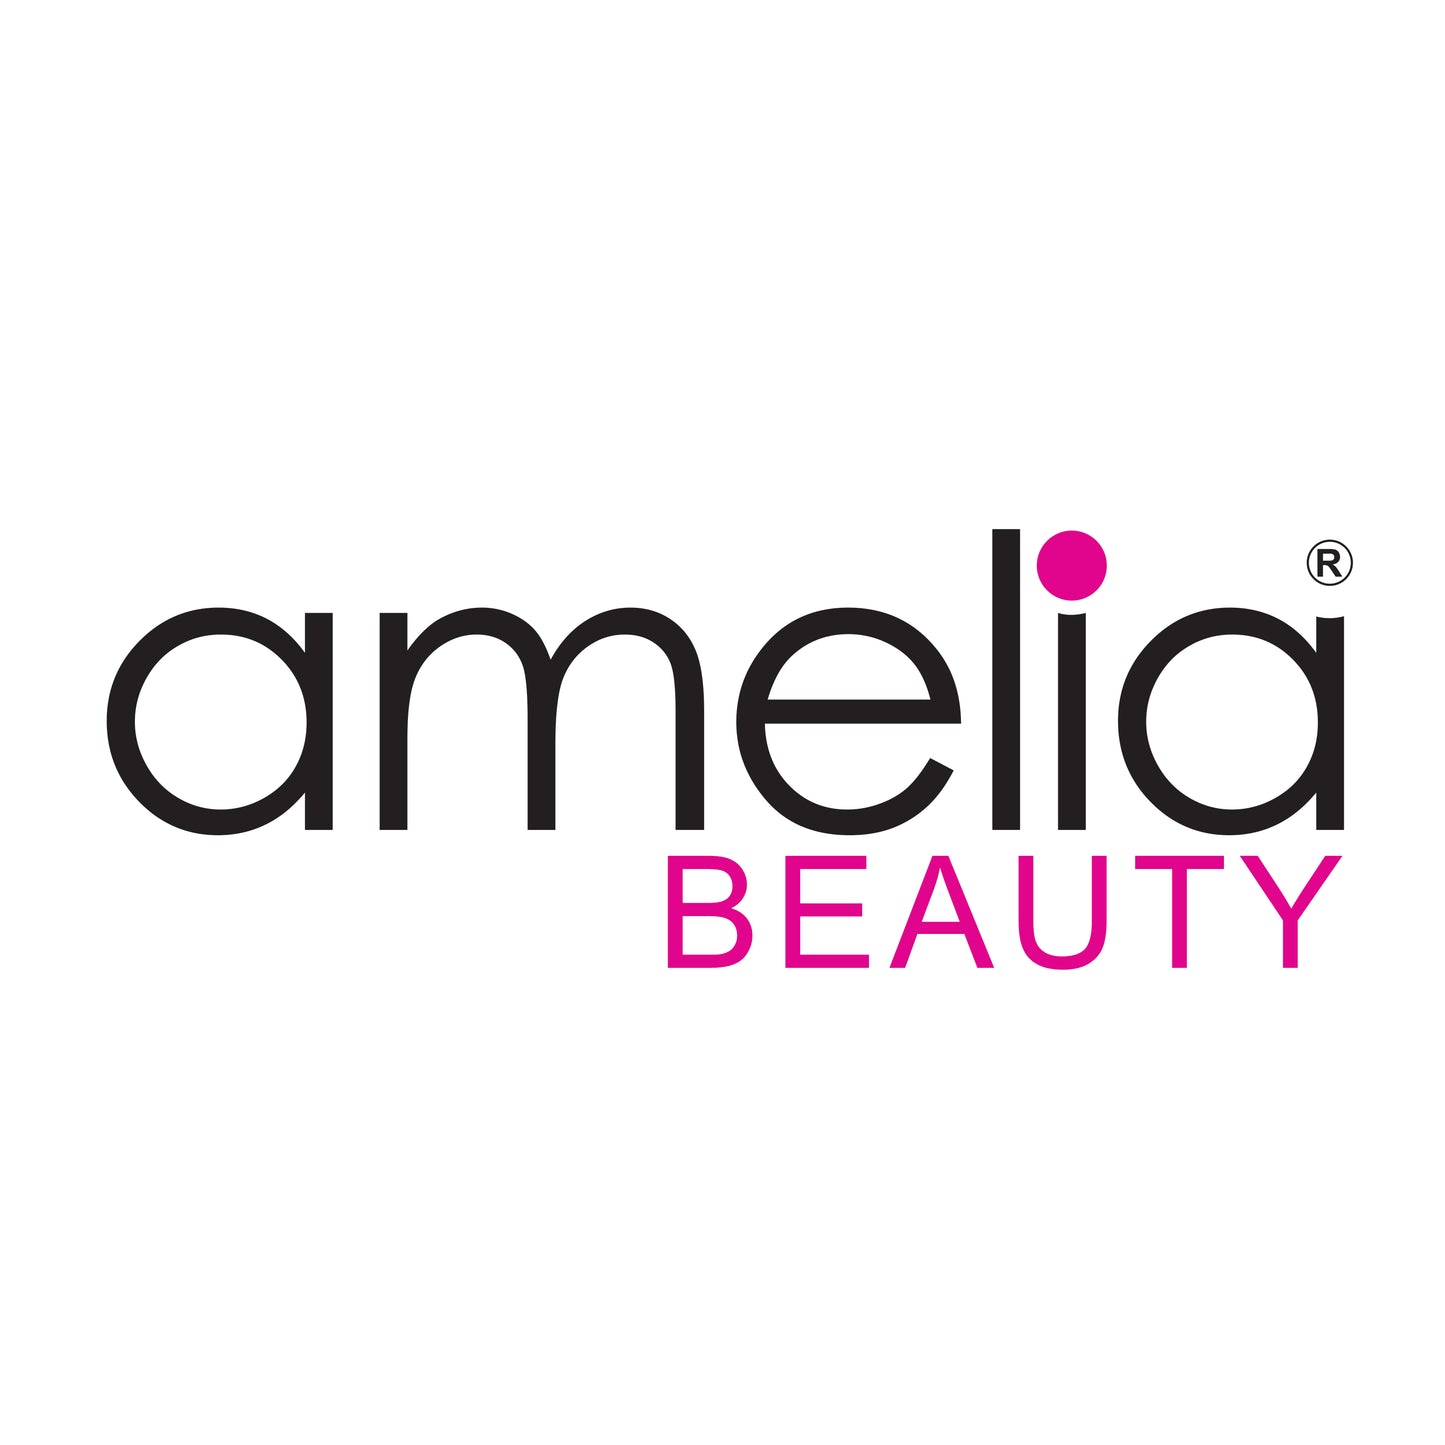 Amelia Beauty Products 8 Medium Elastic Hair Coils, 2.0in Diameter Thick Spiral Hair Ties, Gentle on Hair, Strong Hold and Minimizes Dents and Creases, Cherry